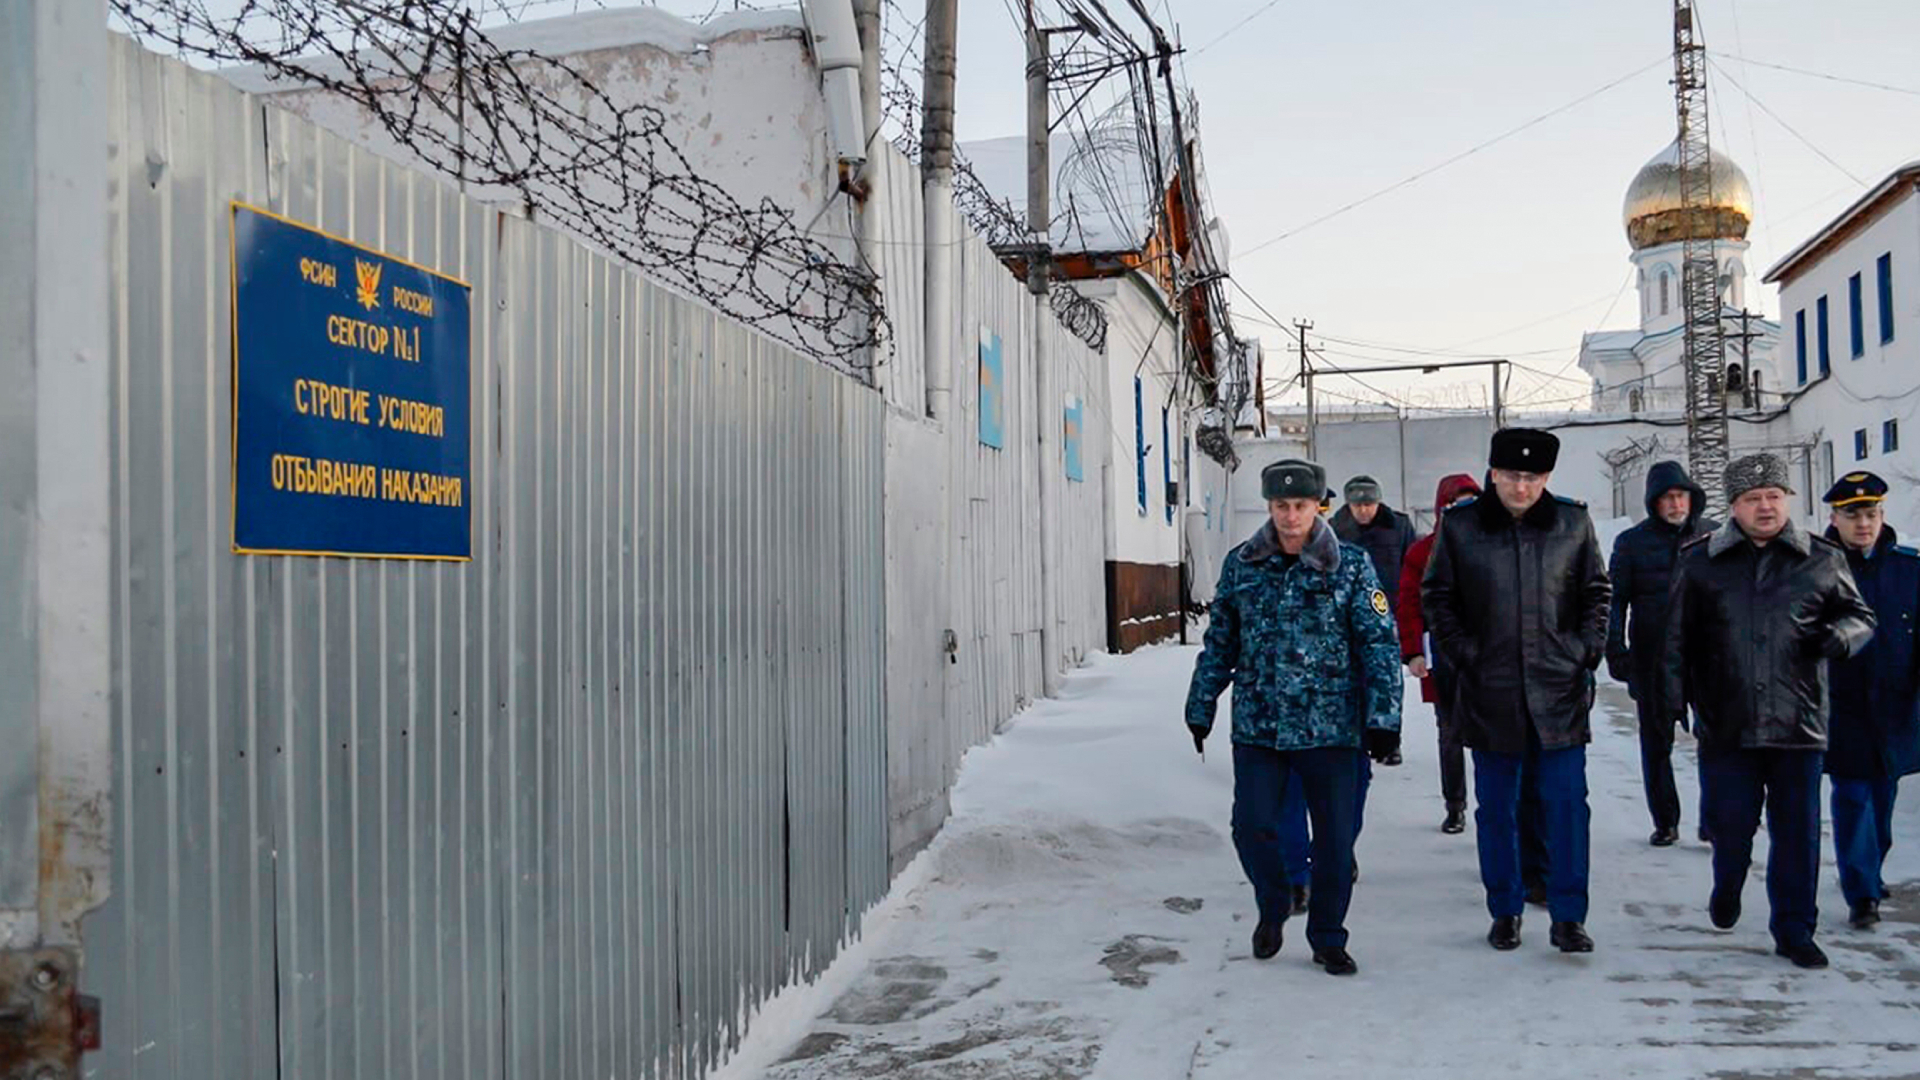 This is what the Siberian prison in Kharp where Navalny died looks like: it is known as polar wolf